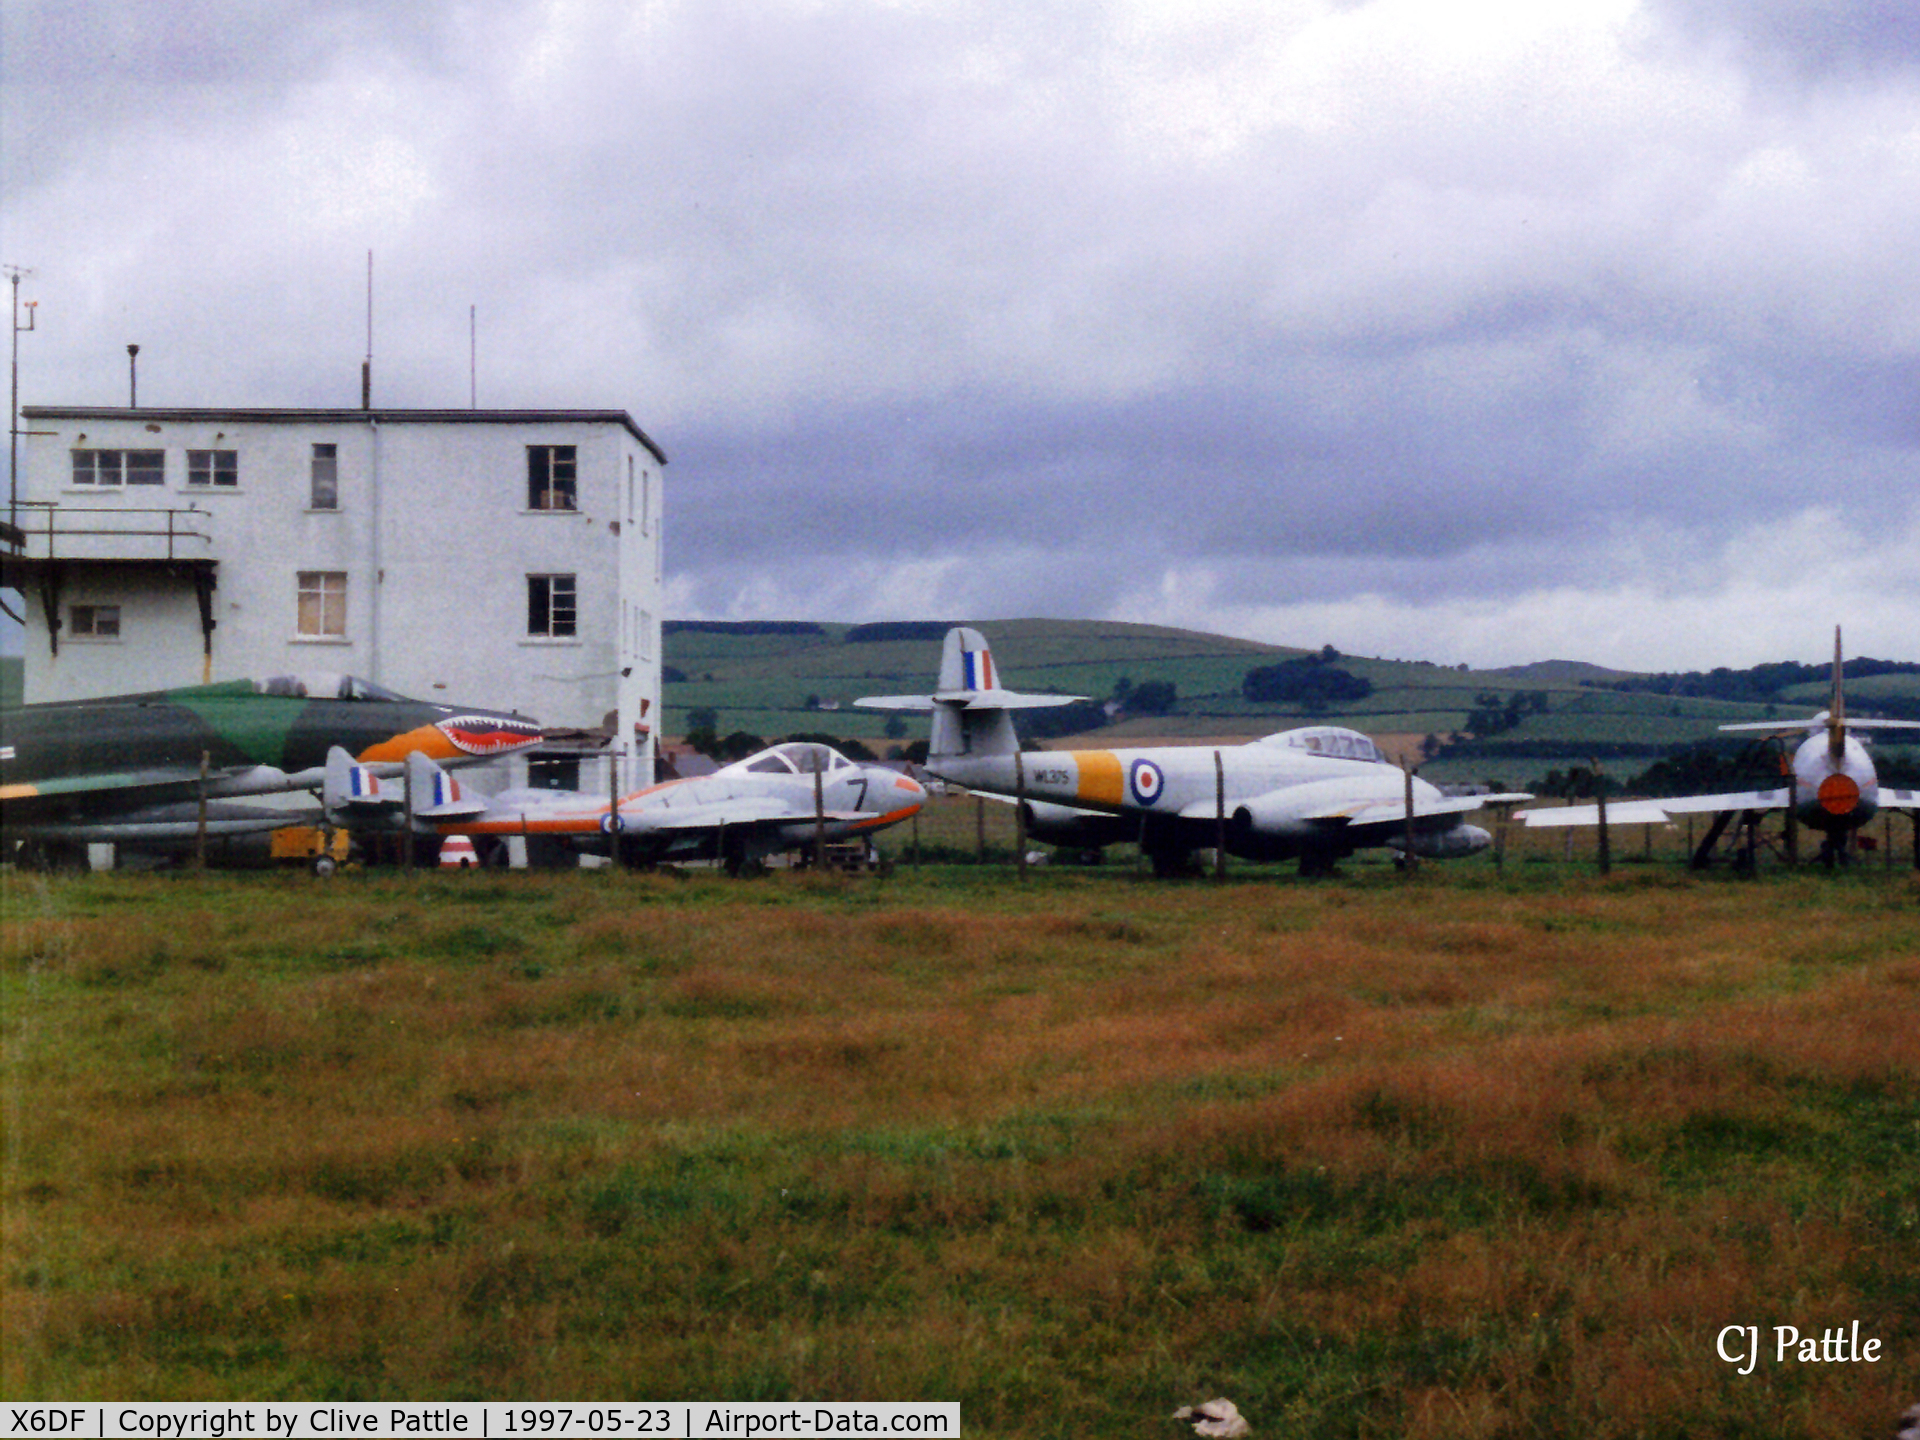 X6DF Airport - Scanned from print. Dumfries & Galloway Air Museum exterior, May 1997.